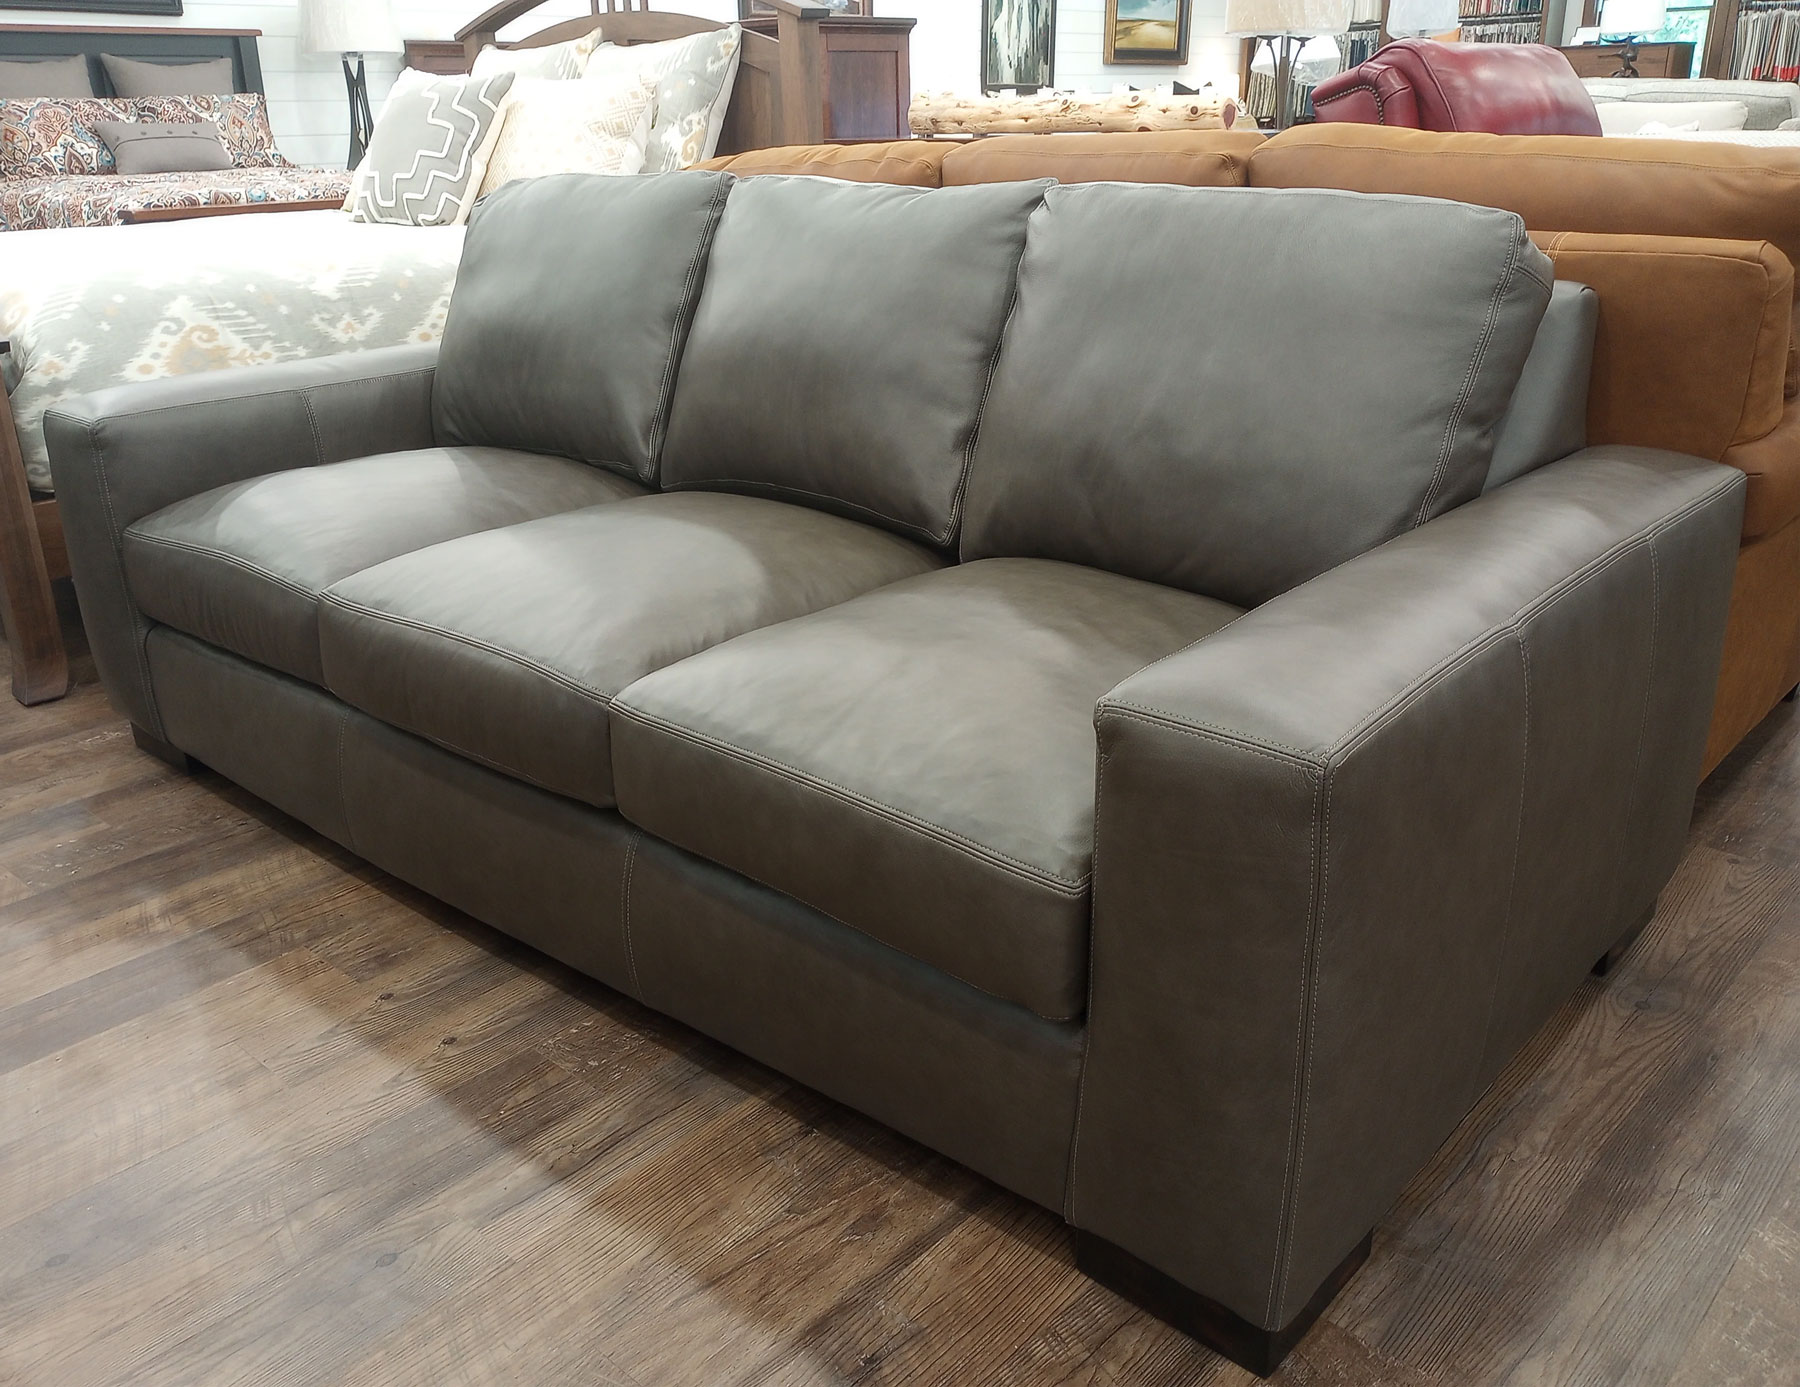 CC Leather 424-03 Designers Choice Sofa in No Regrets Haymaker Leather